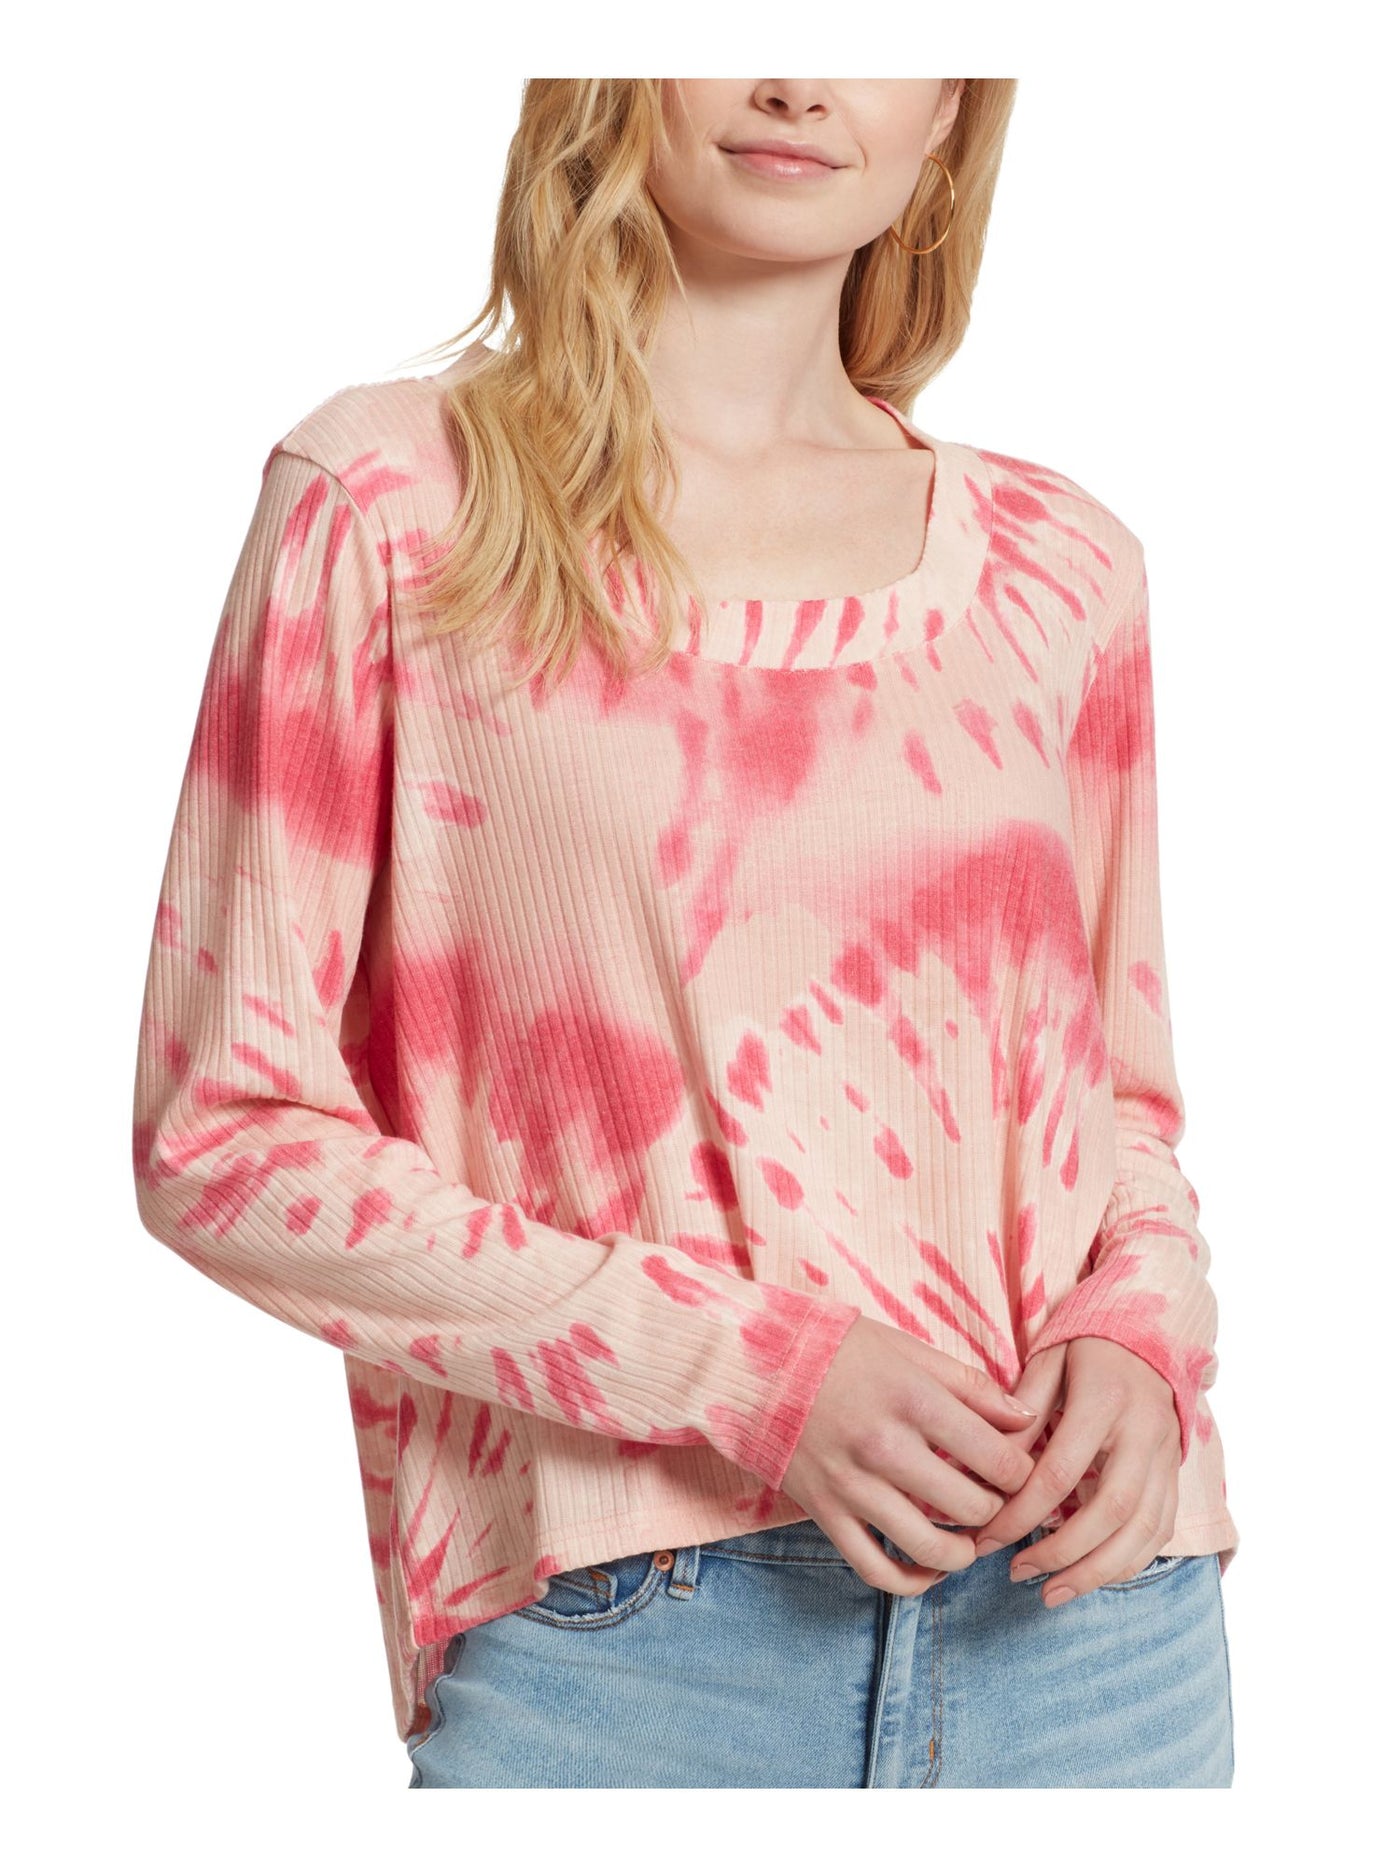 JESSICA SIMPSON Womens Pink Knit Textured Ribbed Printed Long Sleeve Scoop Neck Top Juniors XS